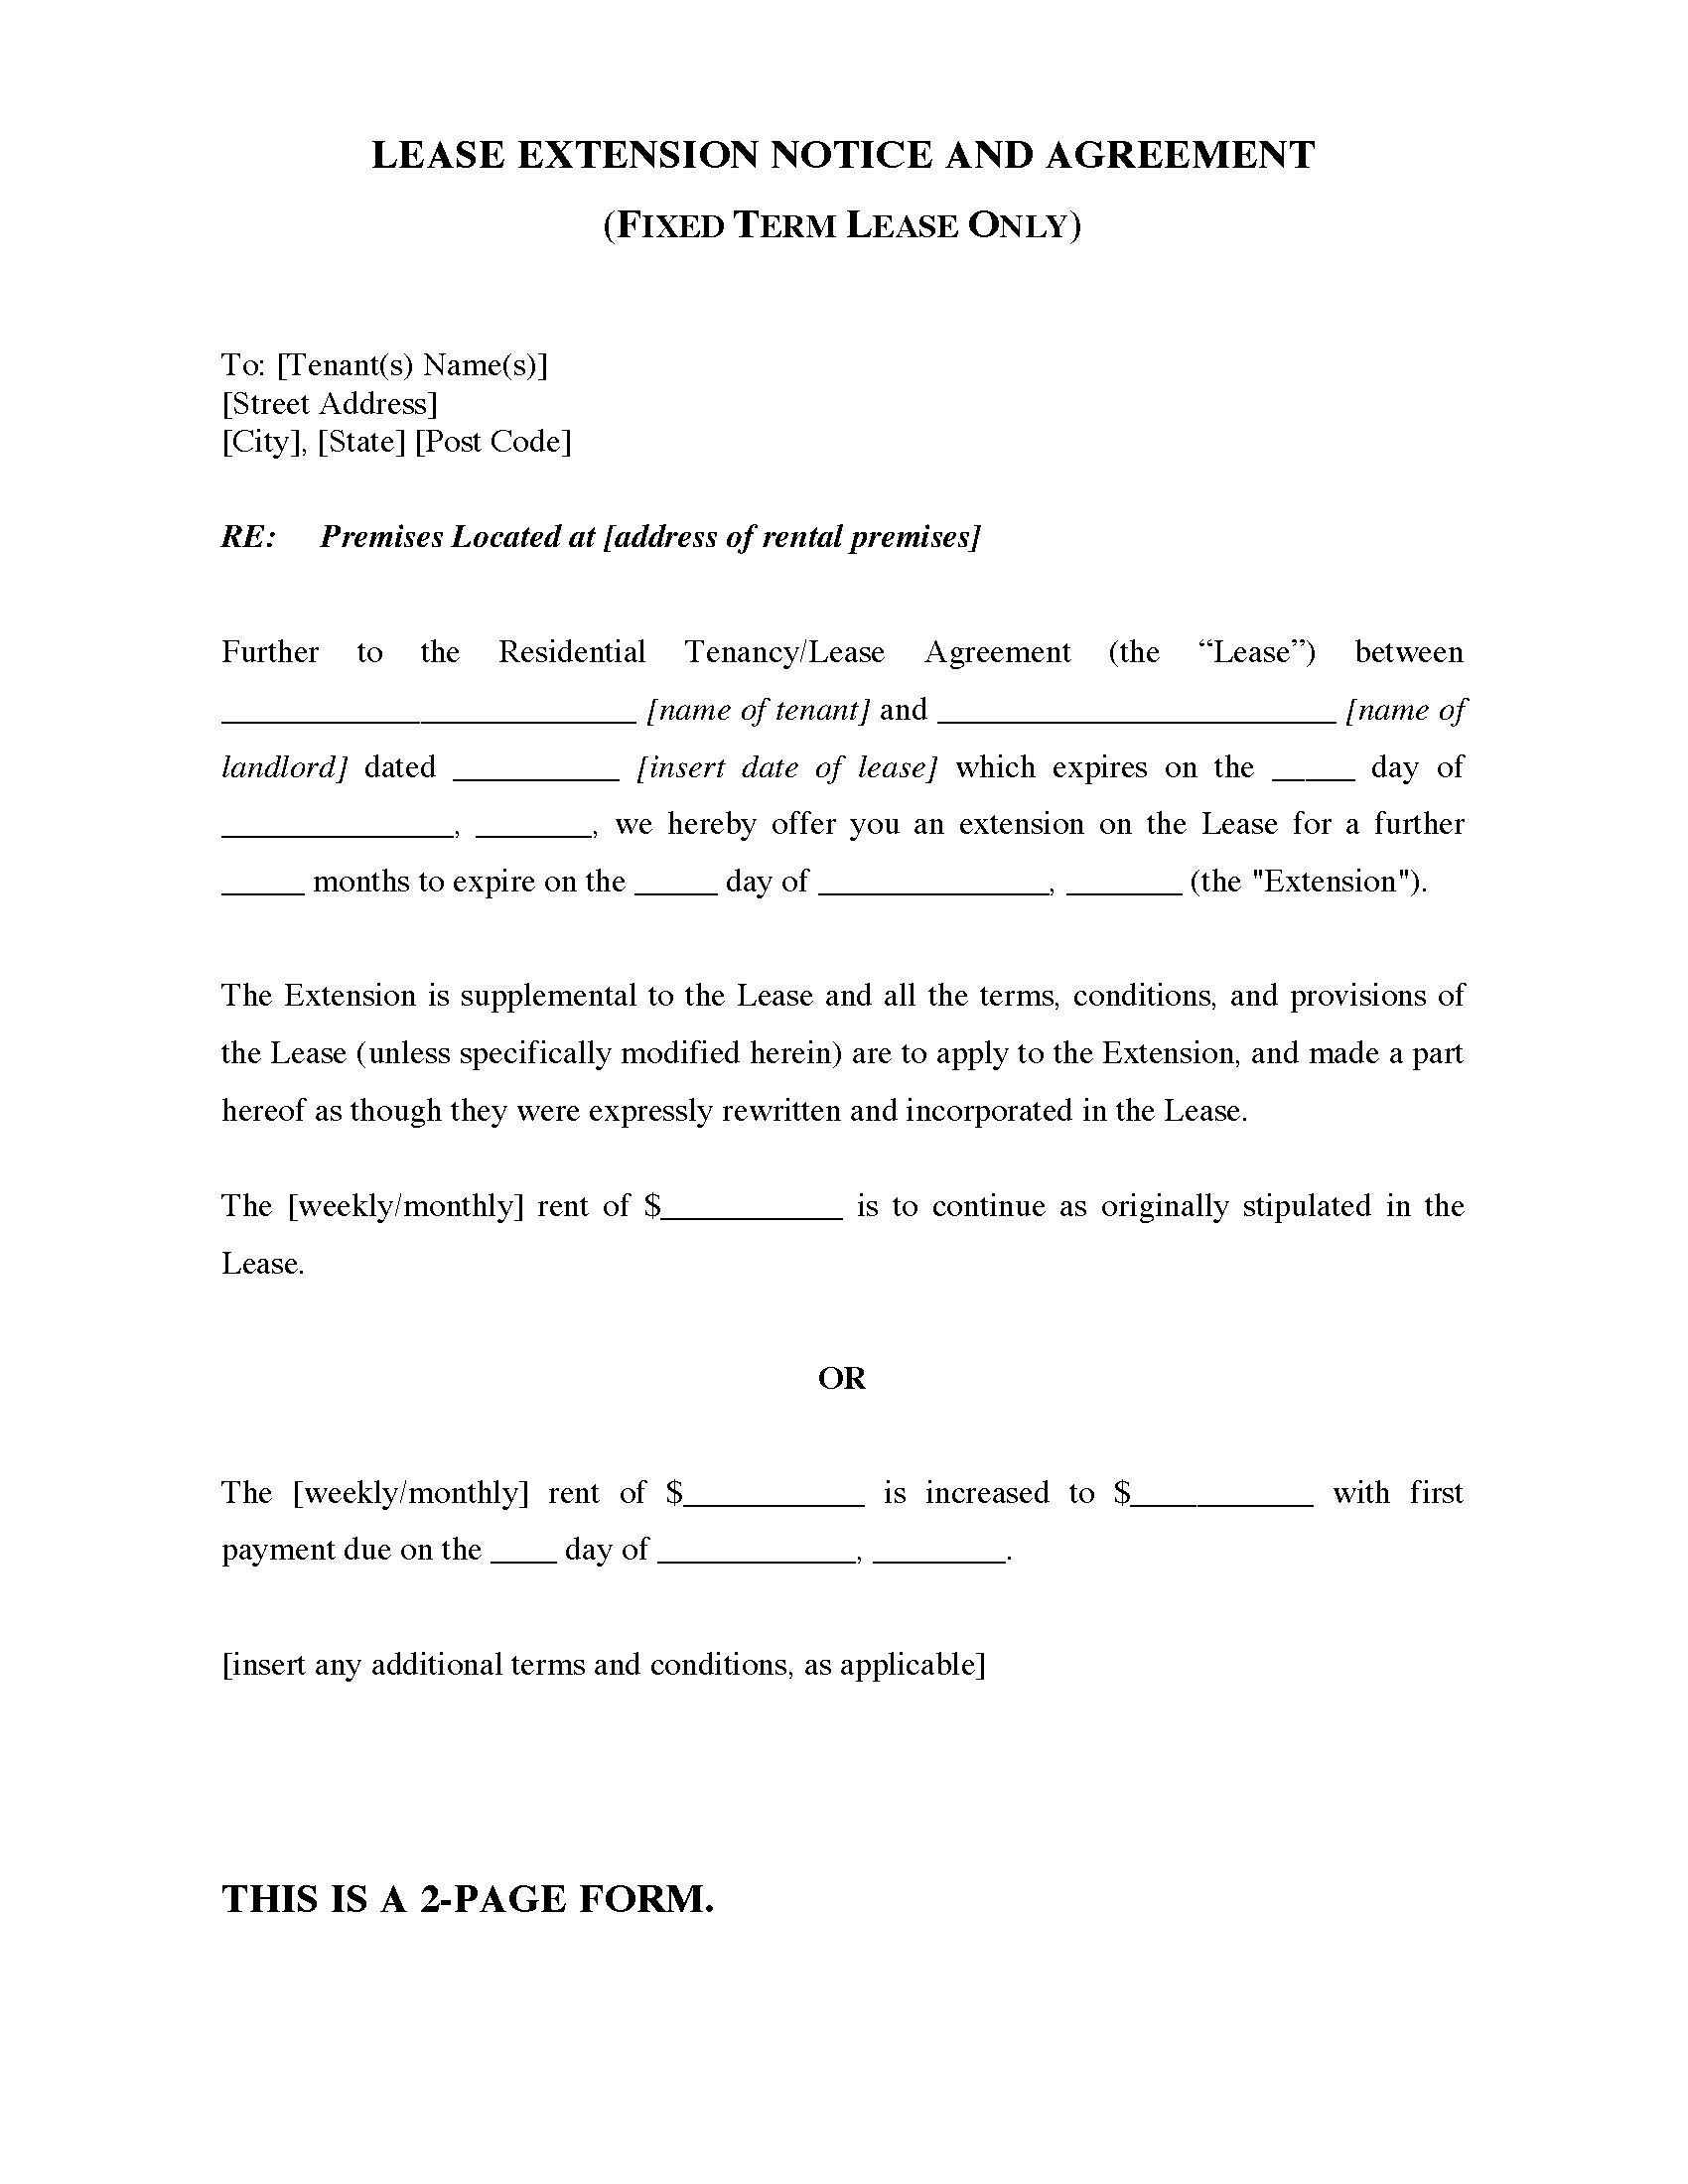 South Australia Fixed Term Lease Extension Agreement Legal Forms and